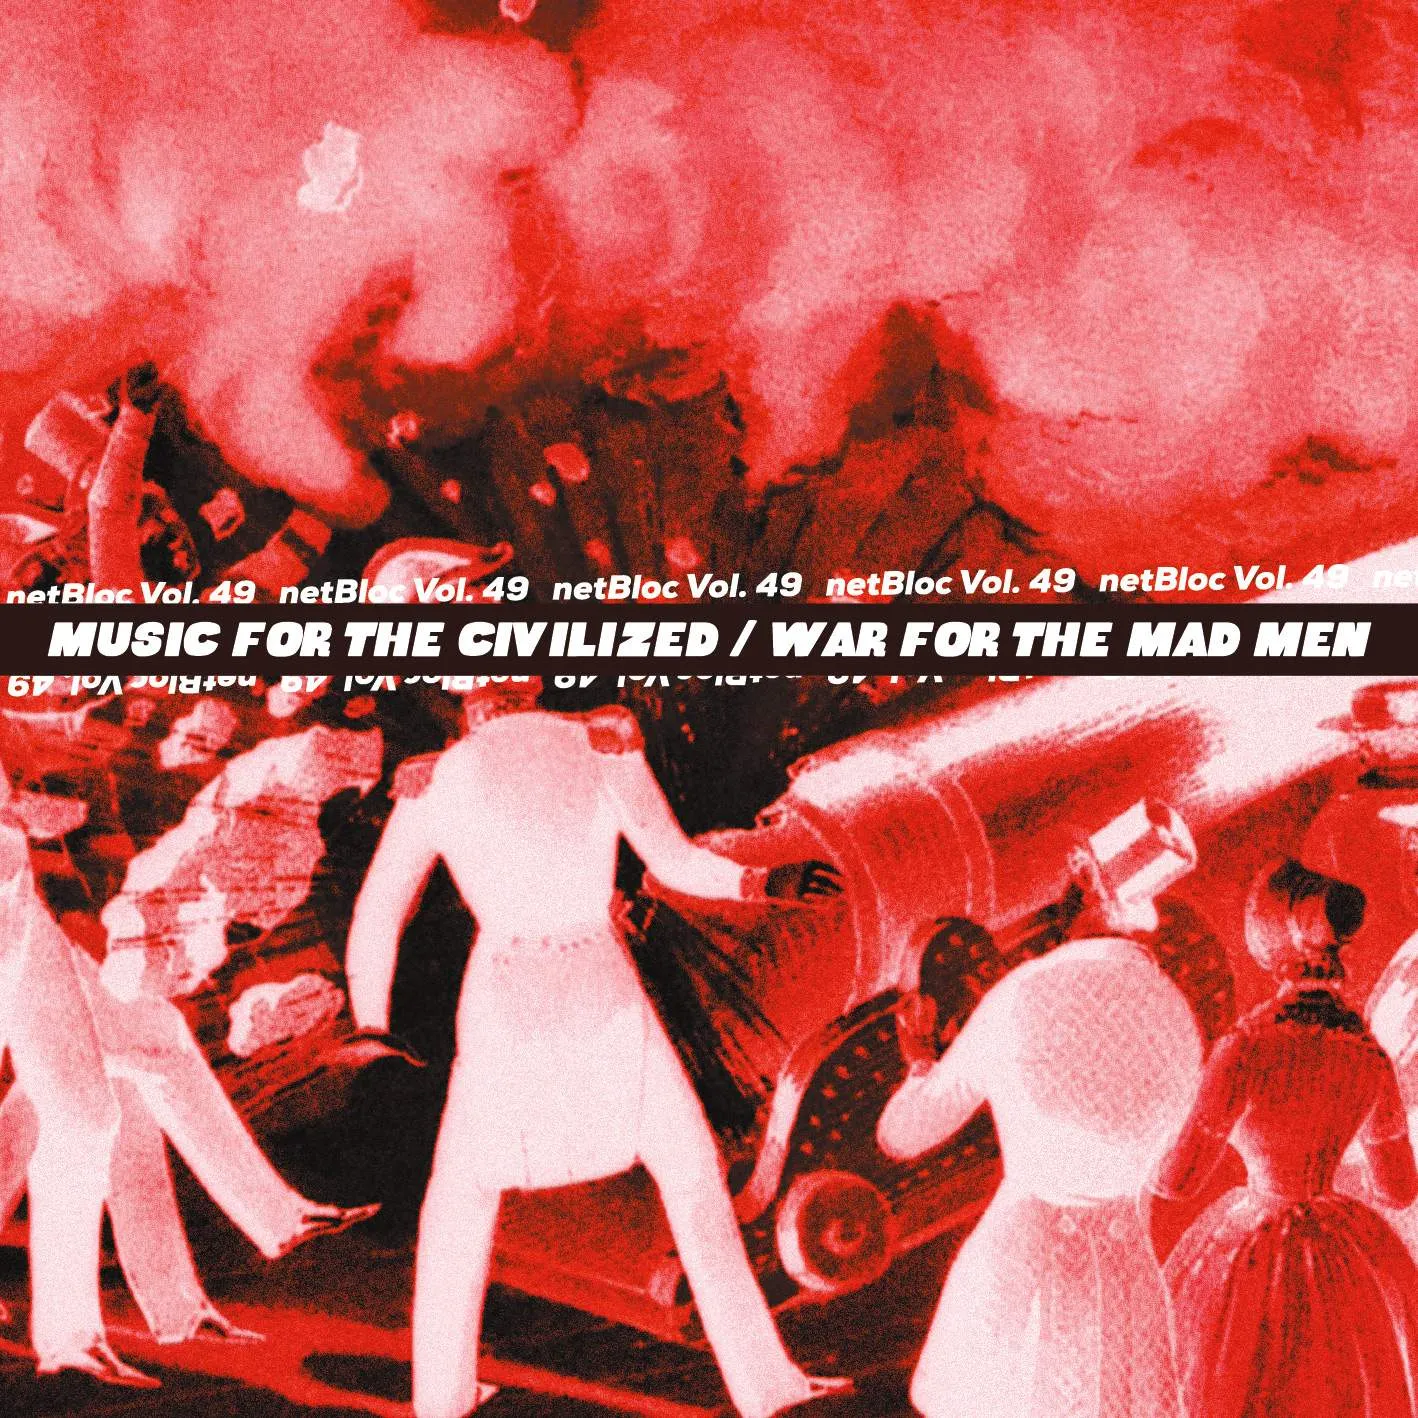 Cover of netBloc Vol. 49: Music For The Civilized / War For The Mad Men